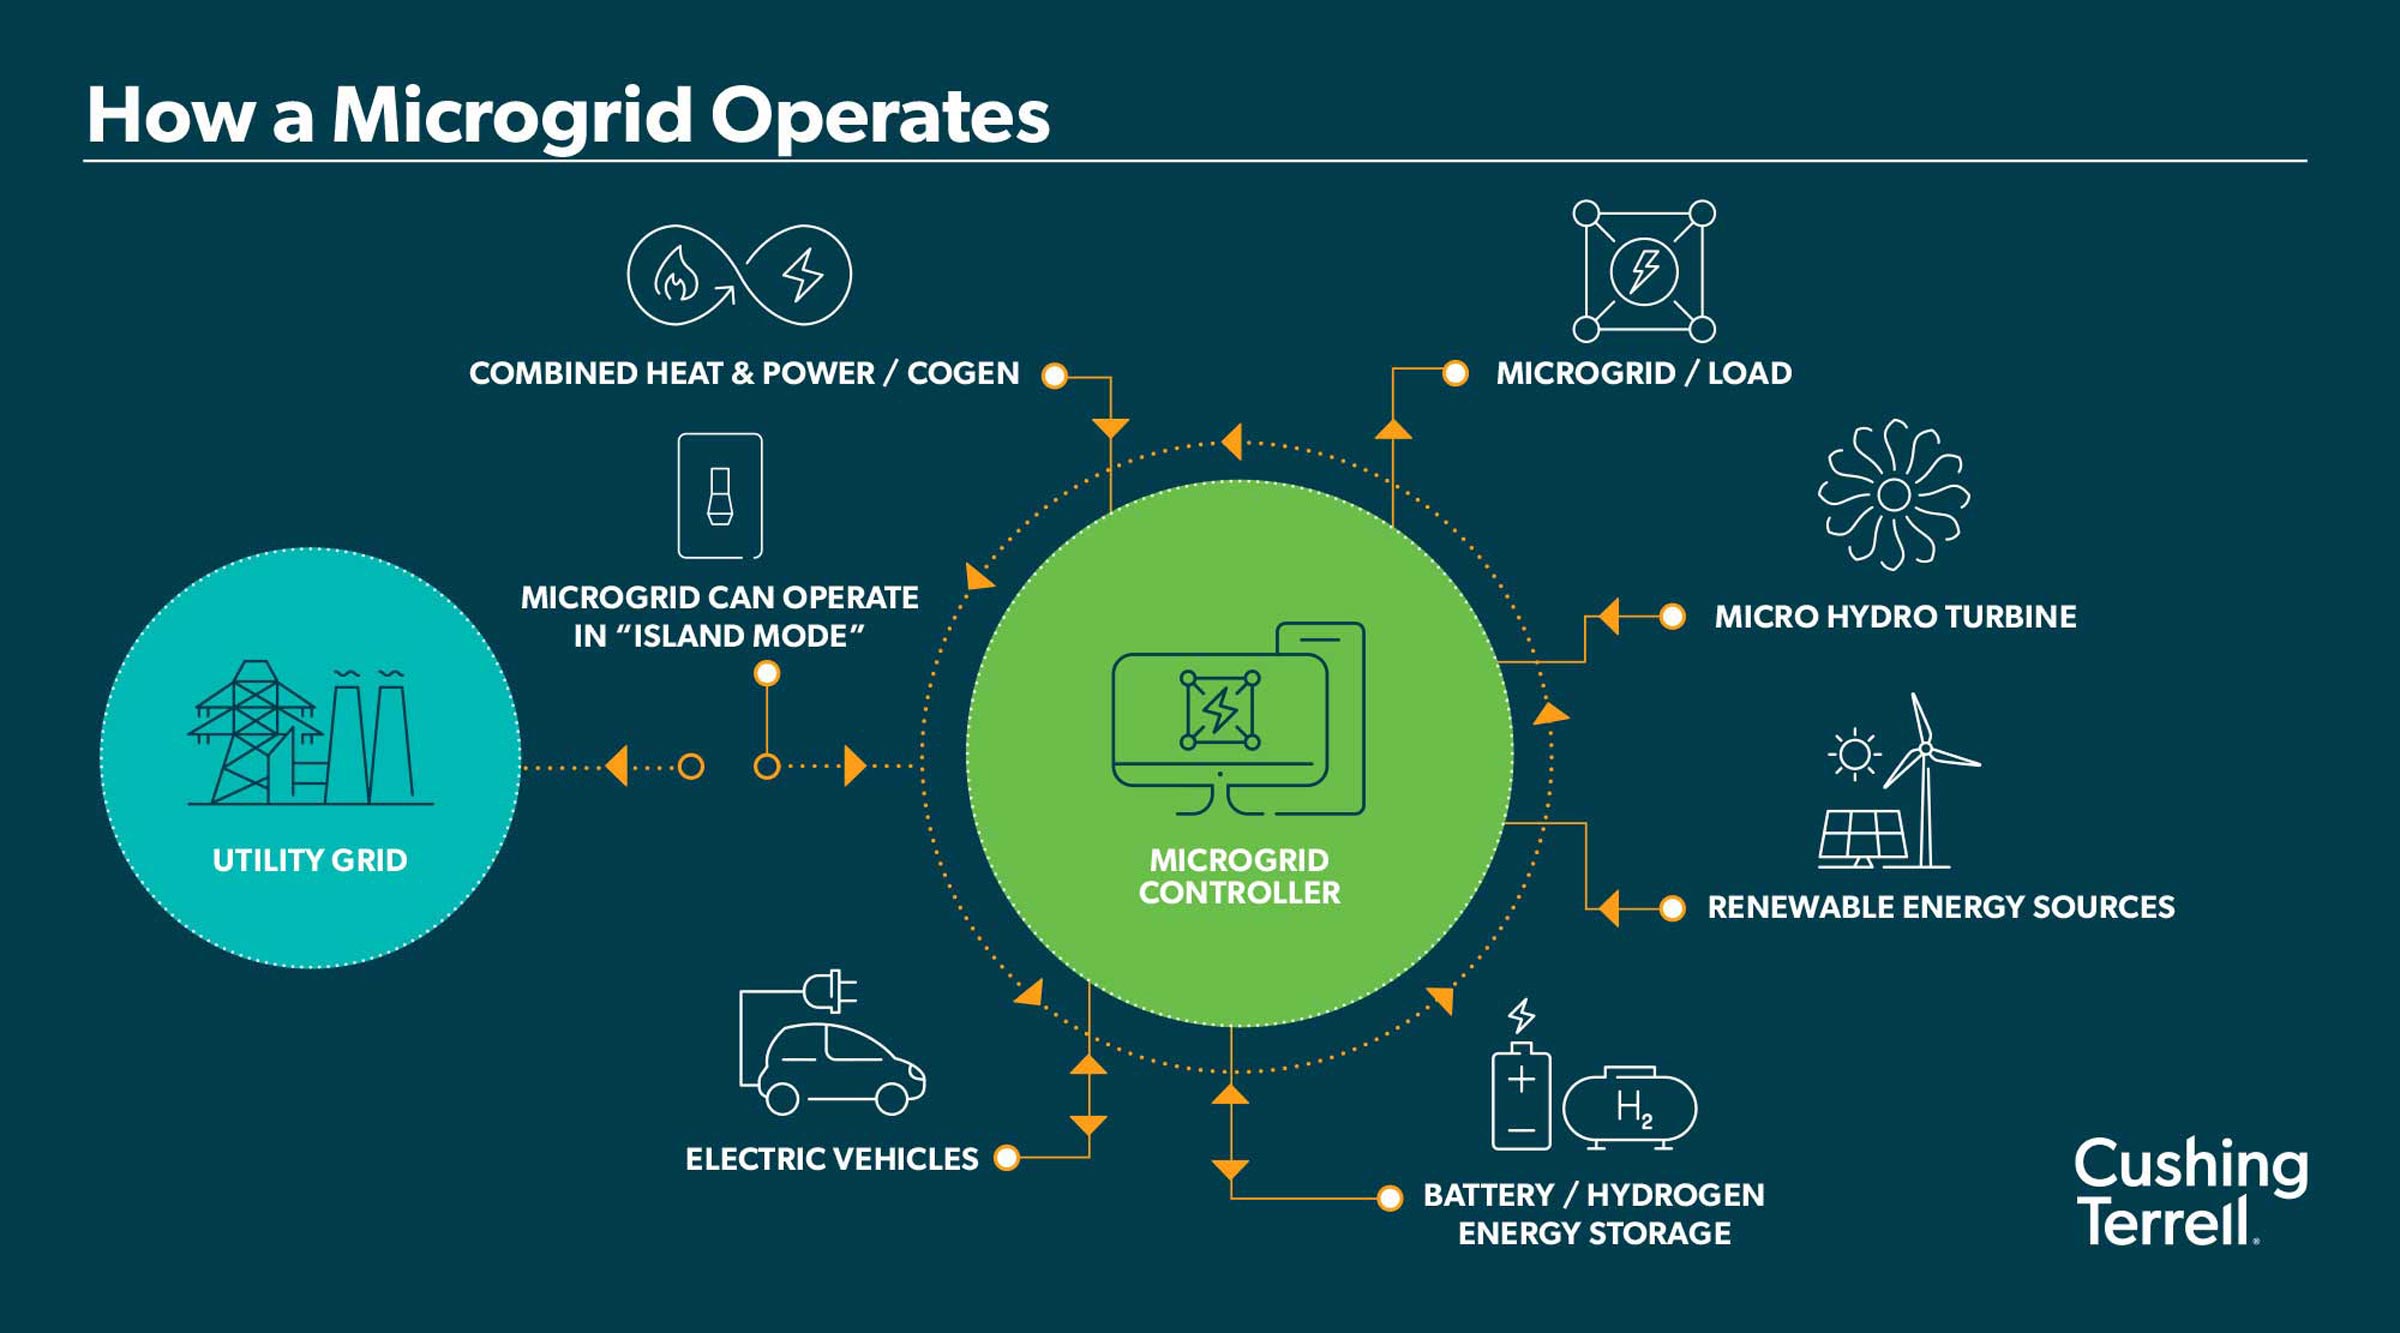 cushing-terrell-microgrids-gbd-magazine-04-modern-day-energy-challenges